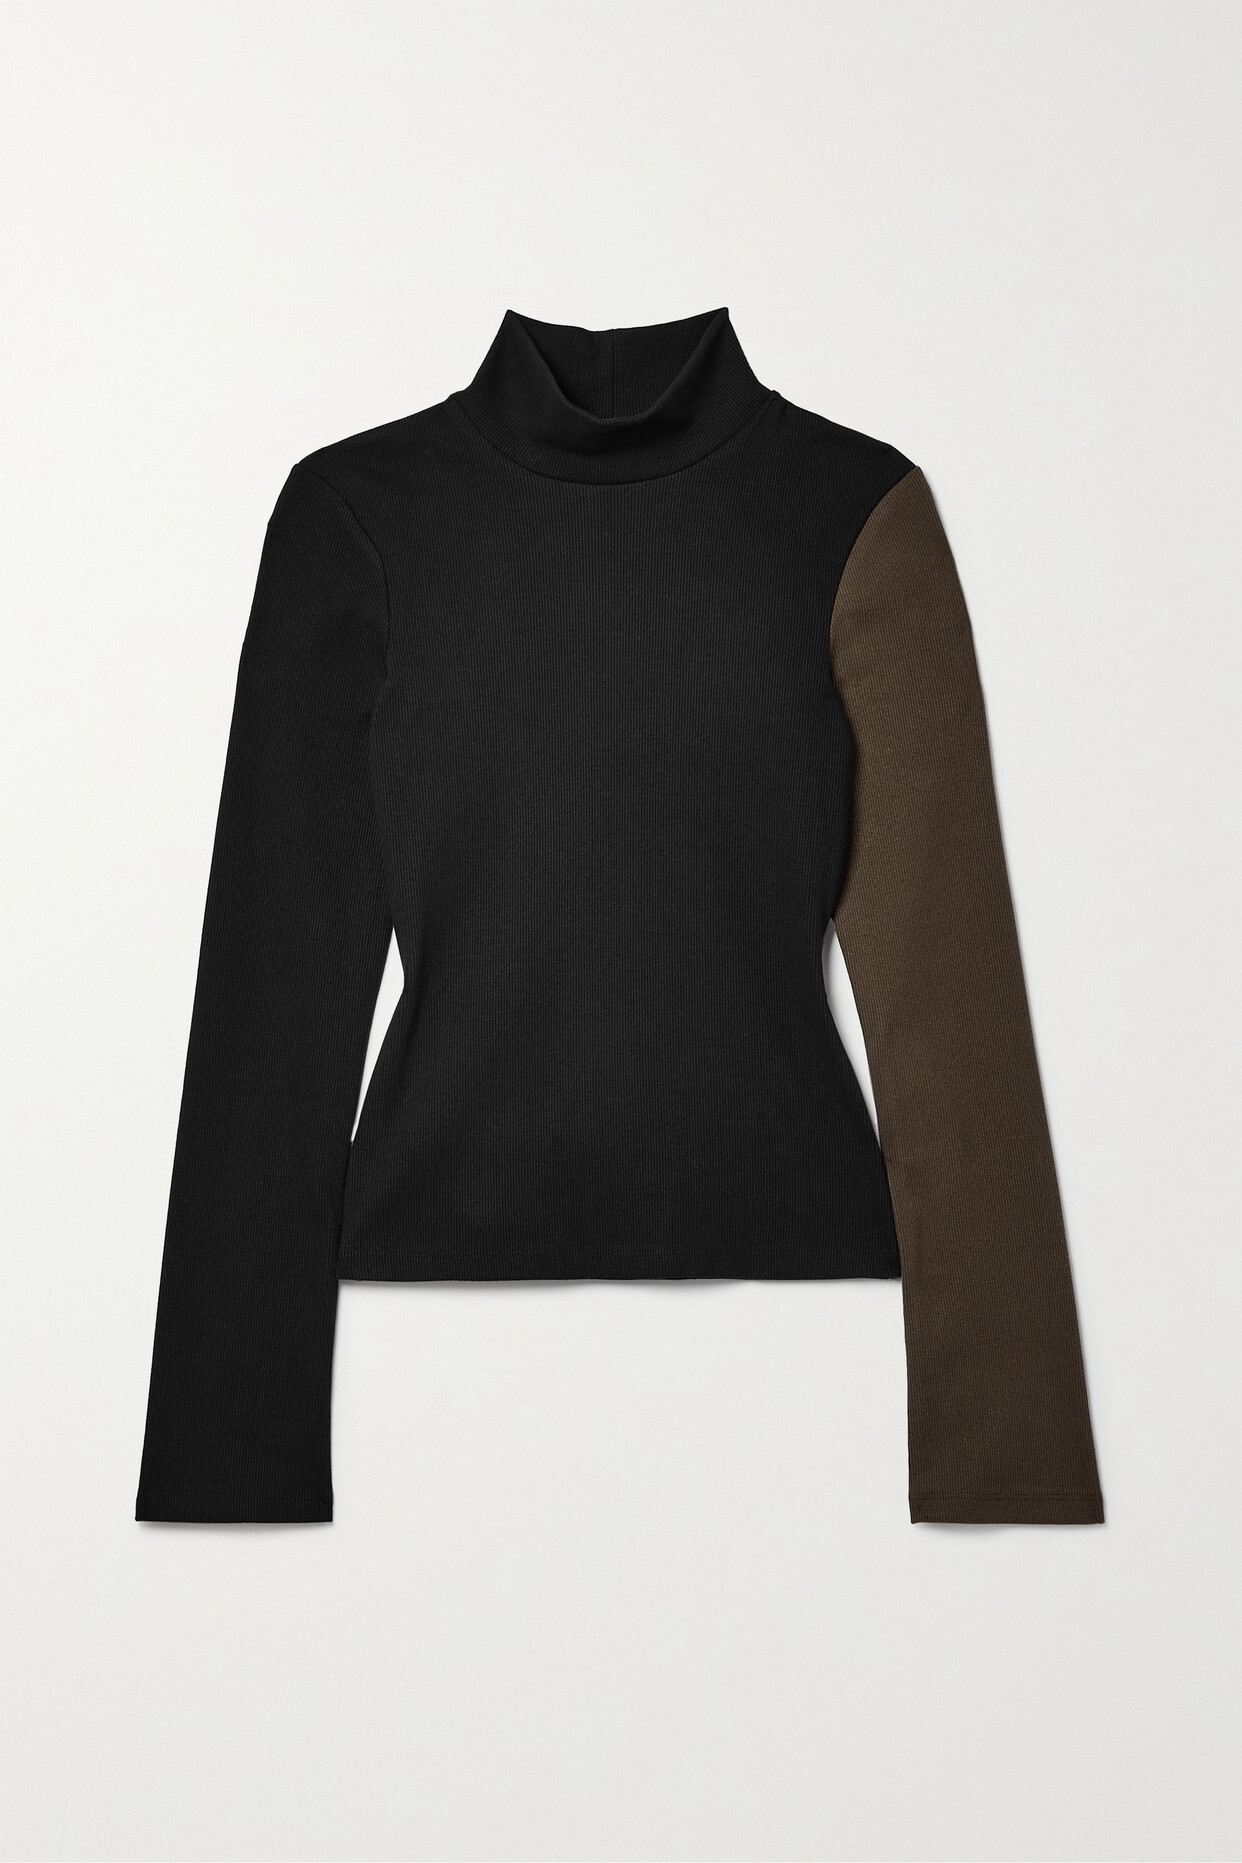 Interior - The Lou Two-tone Cotton-blend Jersey Turtleneck Sweater - Black